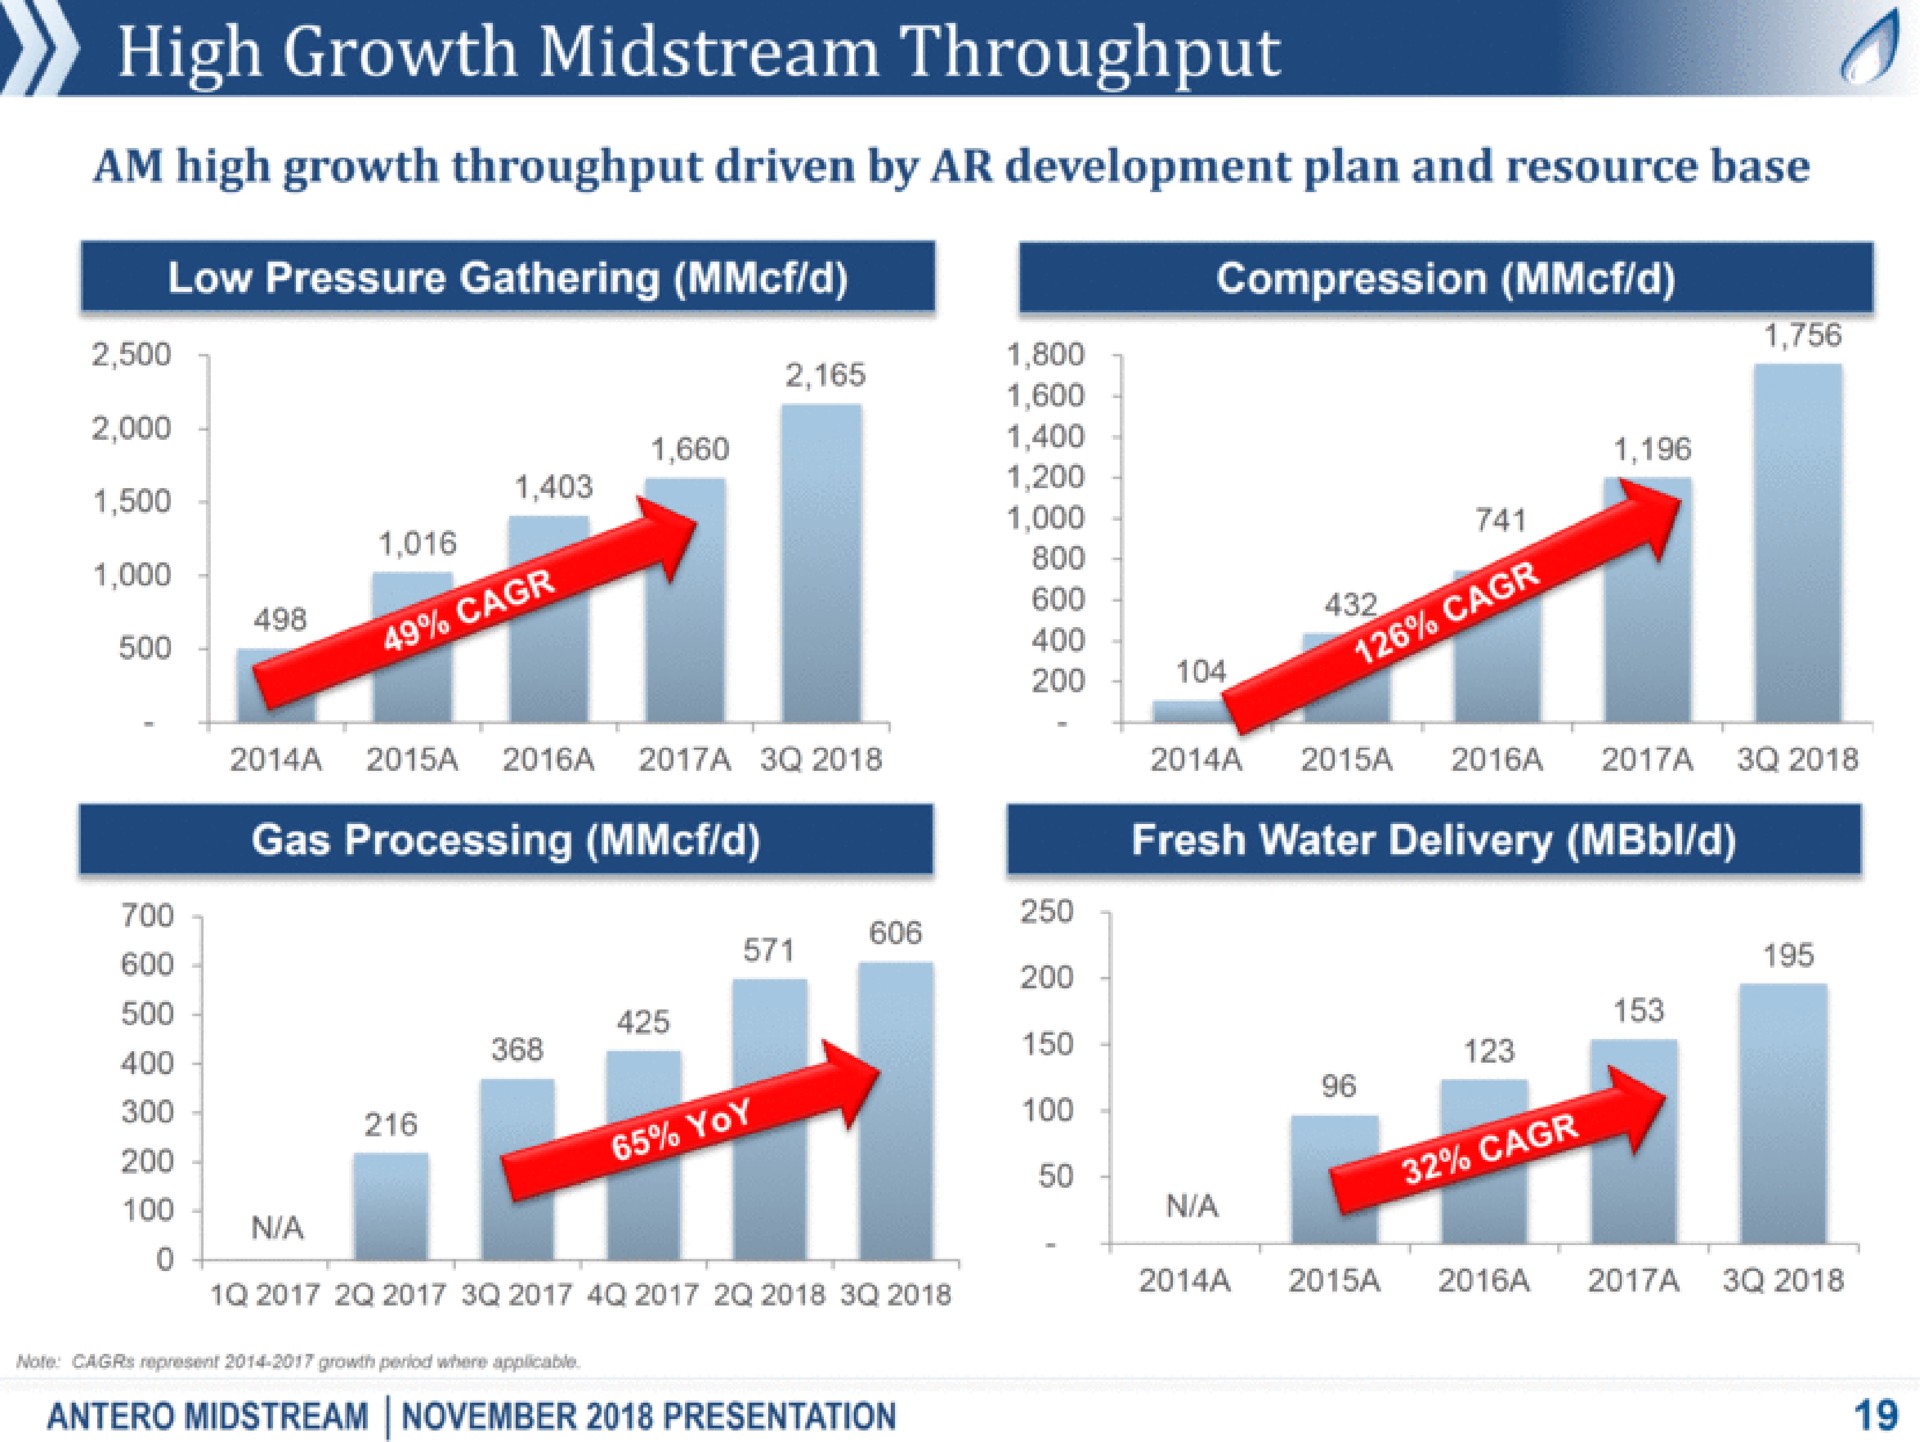 high growth midstream throughput am high growth throughput driven by development plan and resource base low pressure gathering compression a gas processing toe a a a a period applicable midstream presentation | Antero Midstream Partners